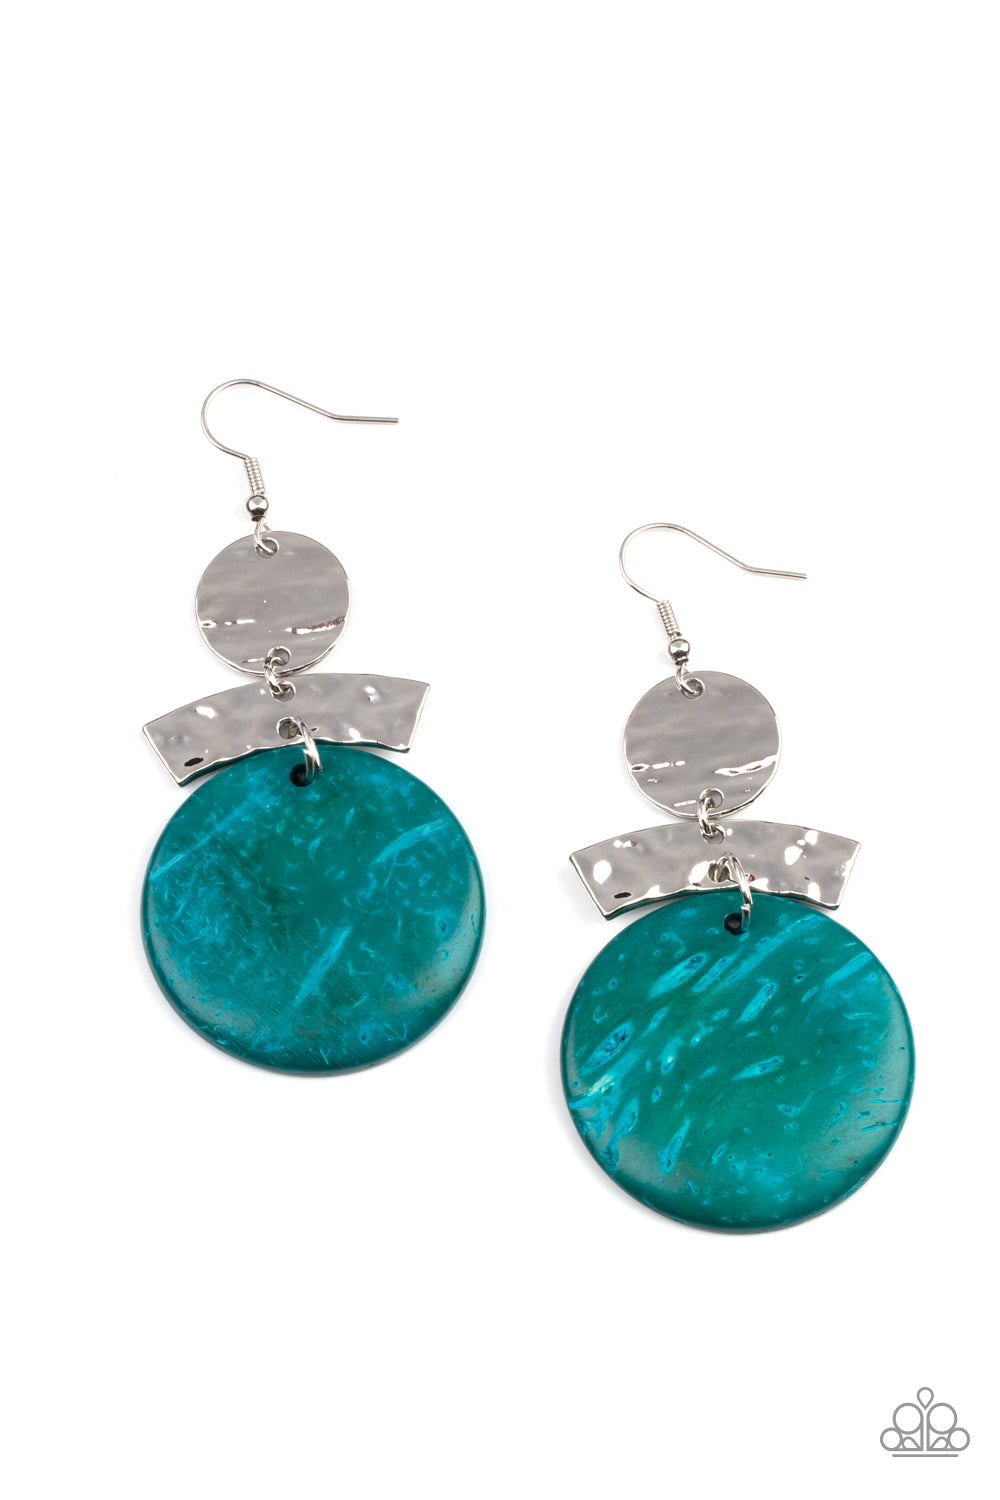 five-dollar-jewelry-diva-of-my-domain-blue-earrings-paparazzi-accessories